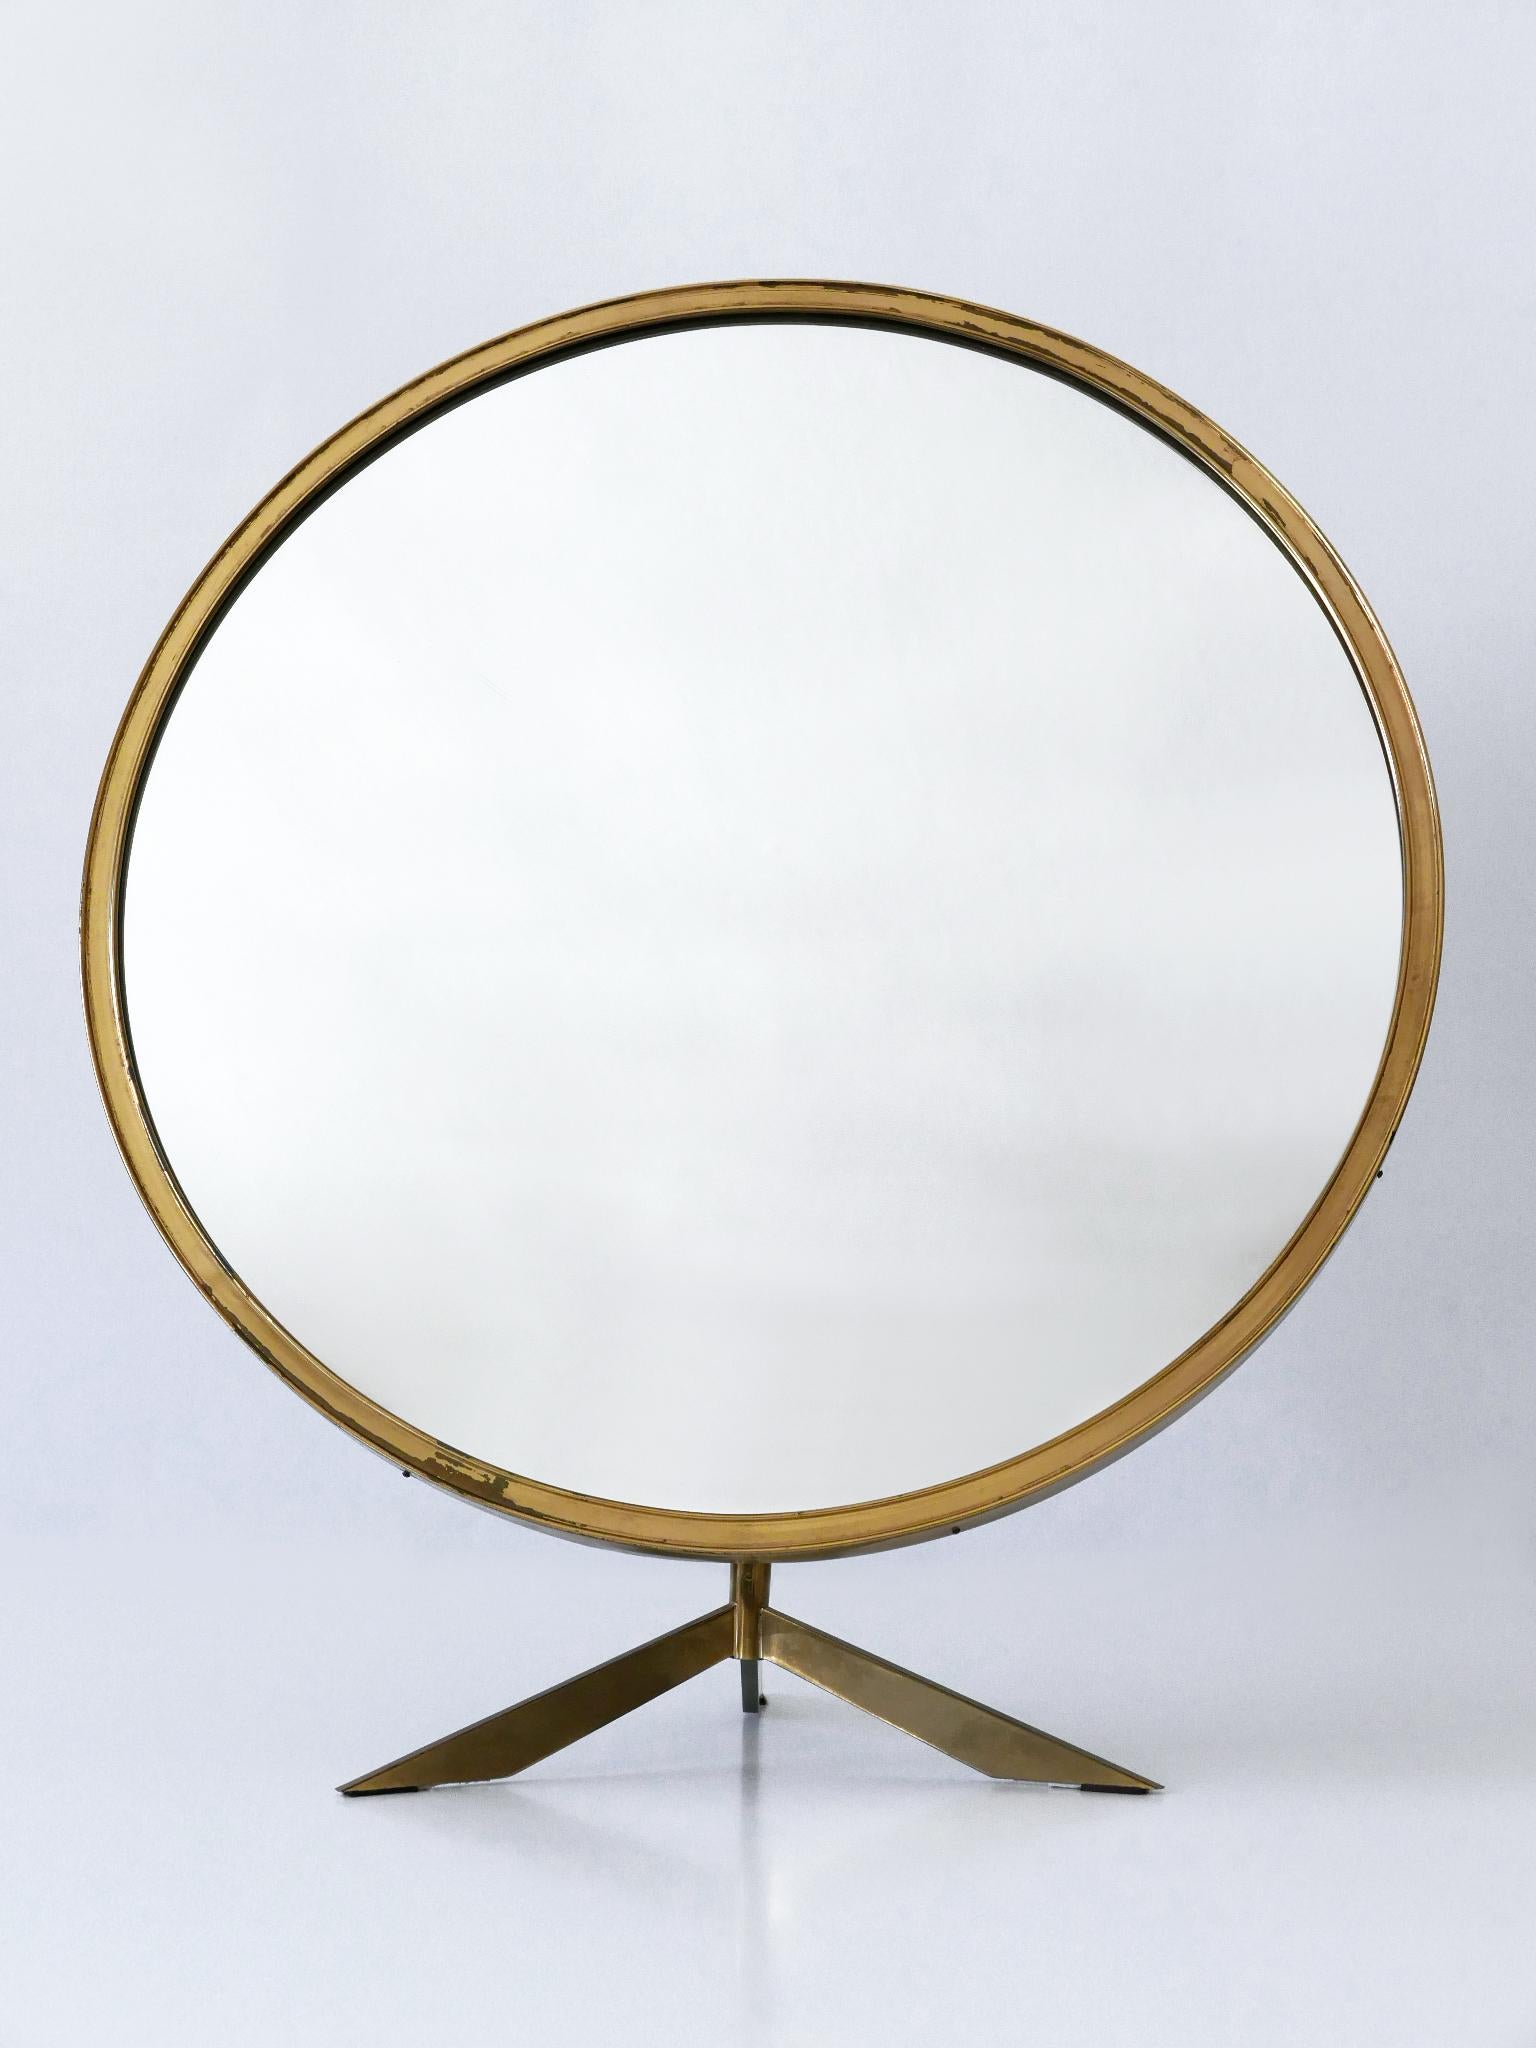 Elegant Mid-Century Modern Wall or Vanity Mirror by Zierform Germany 1950s For Sale 14